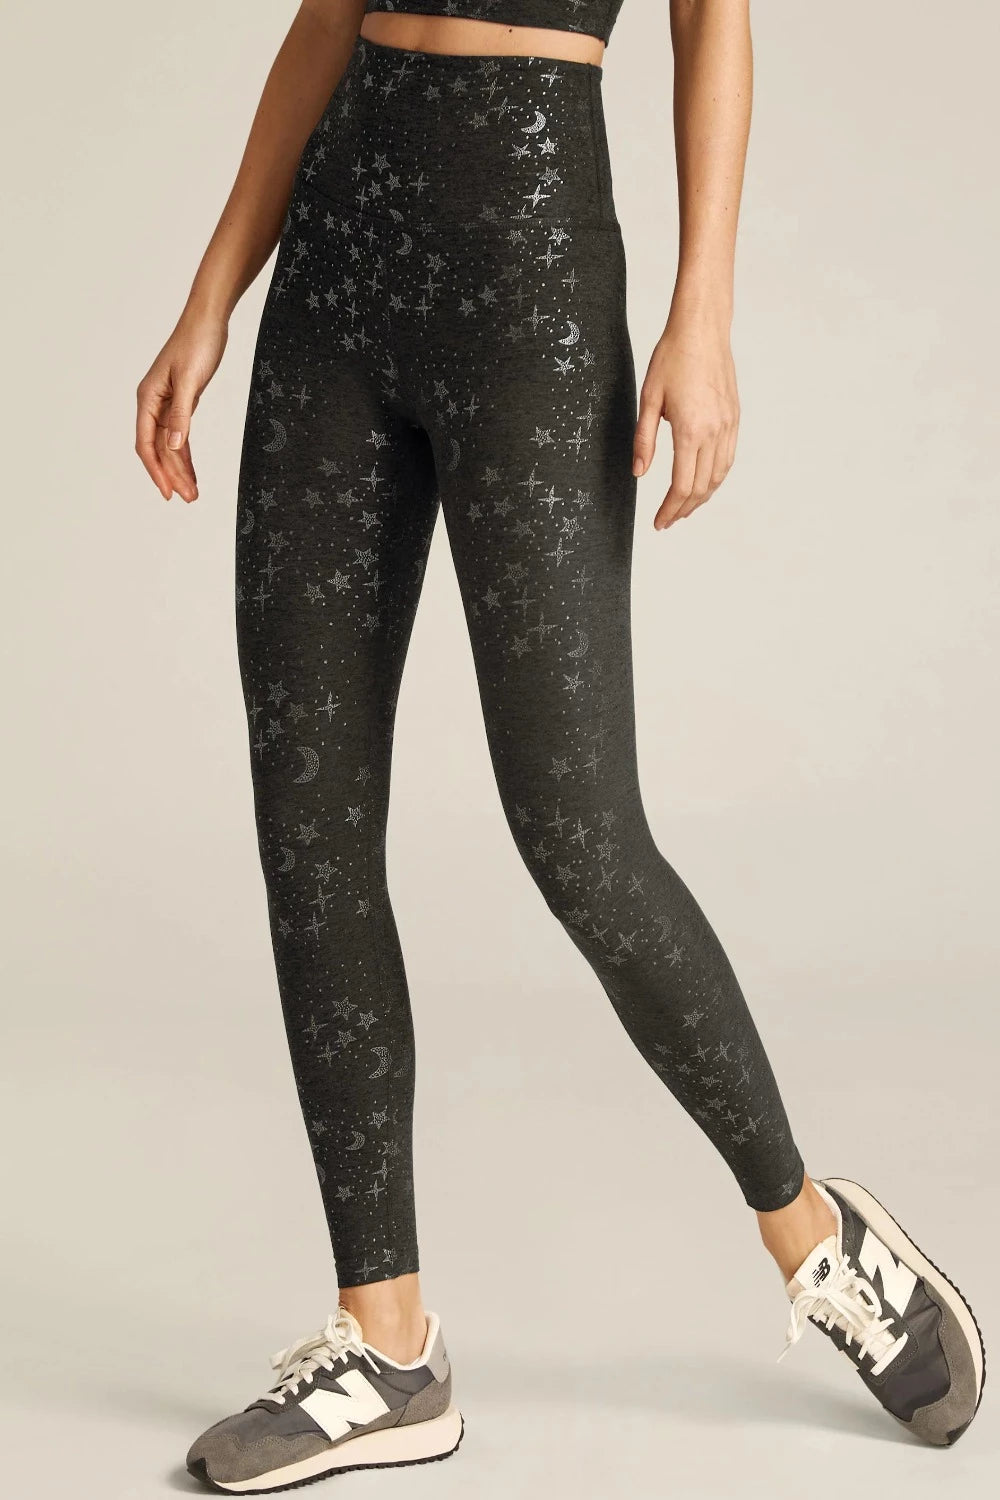 SoftShine High Waisted Midi Legging in Gunmetal Starry Night Foil –  Research and Design